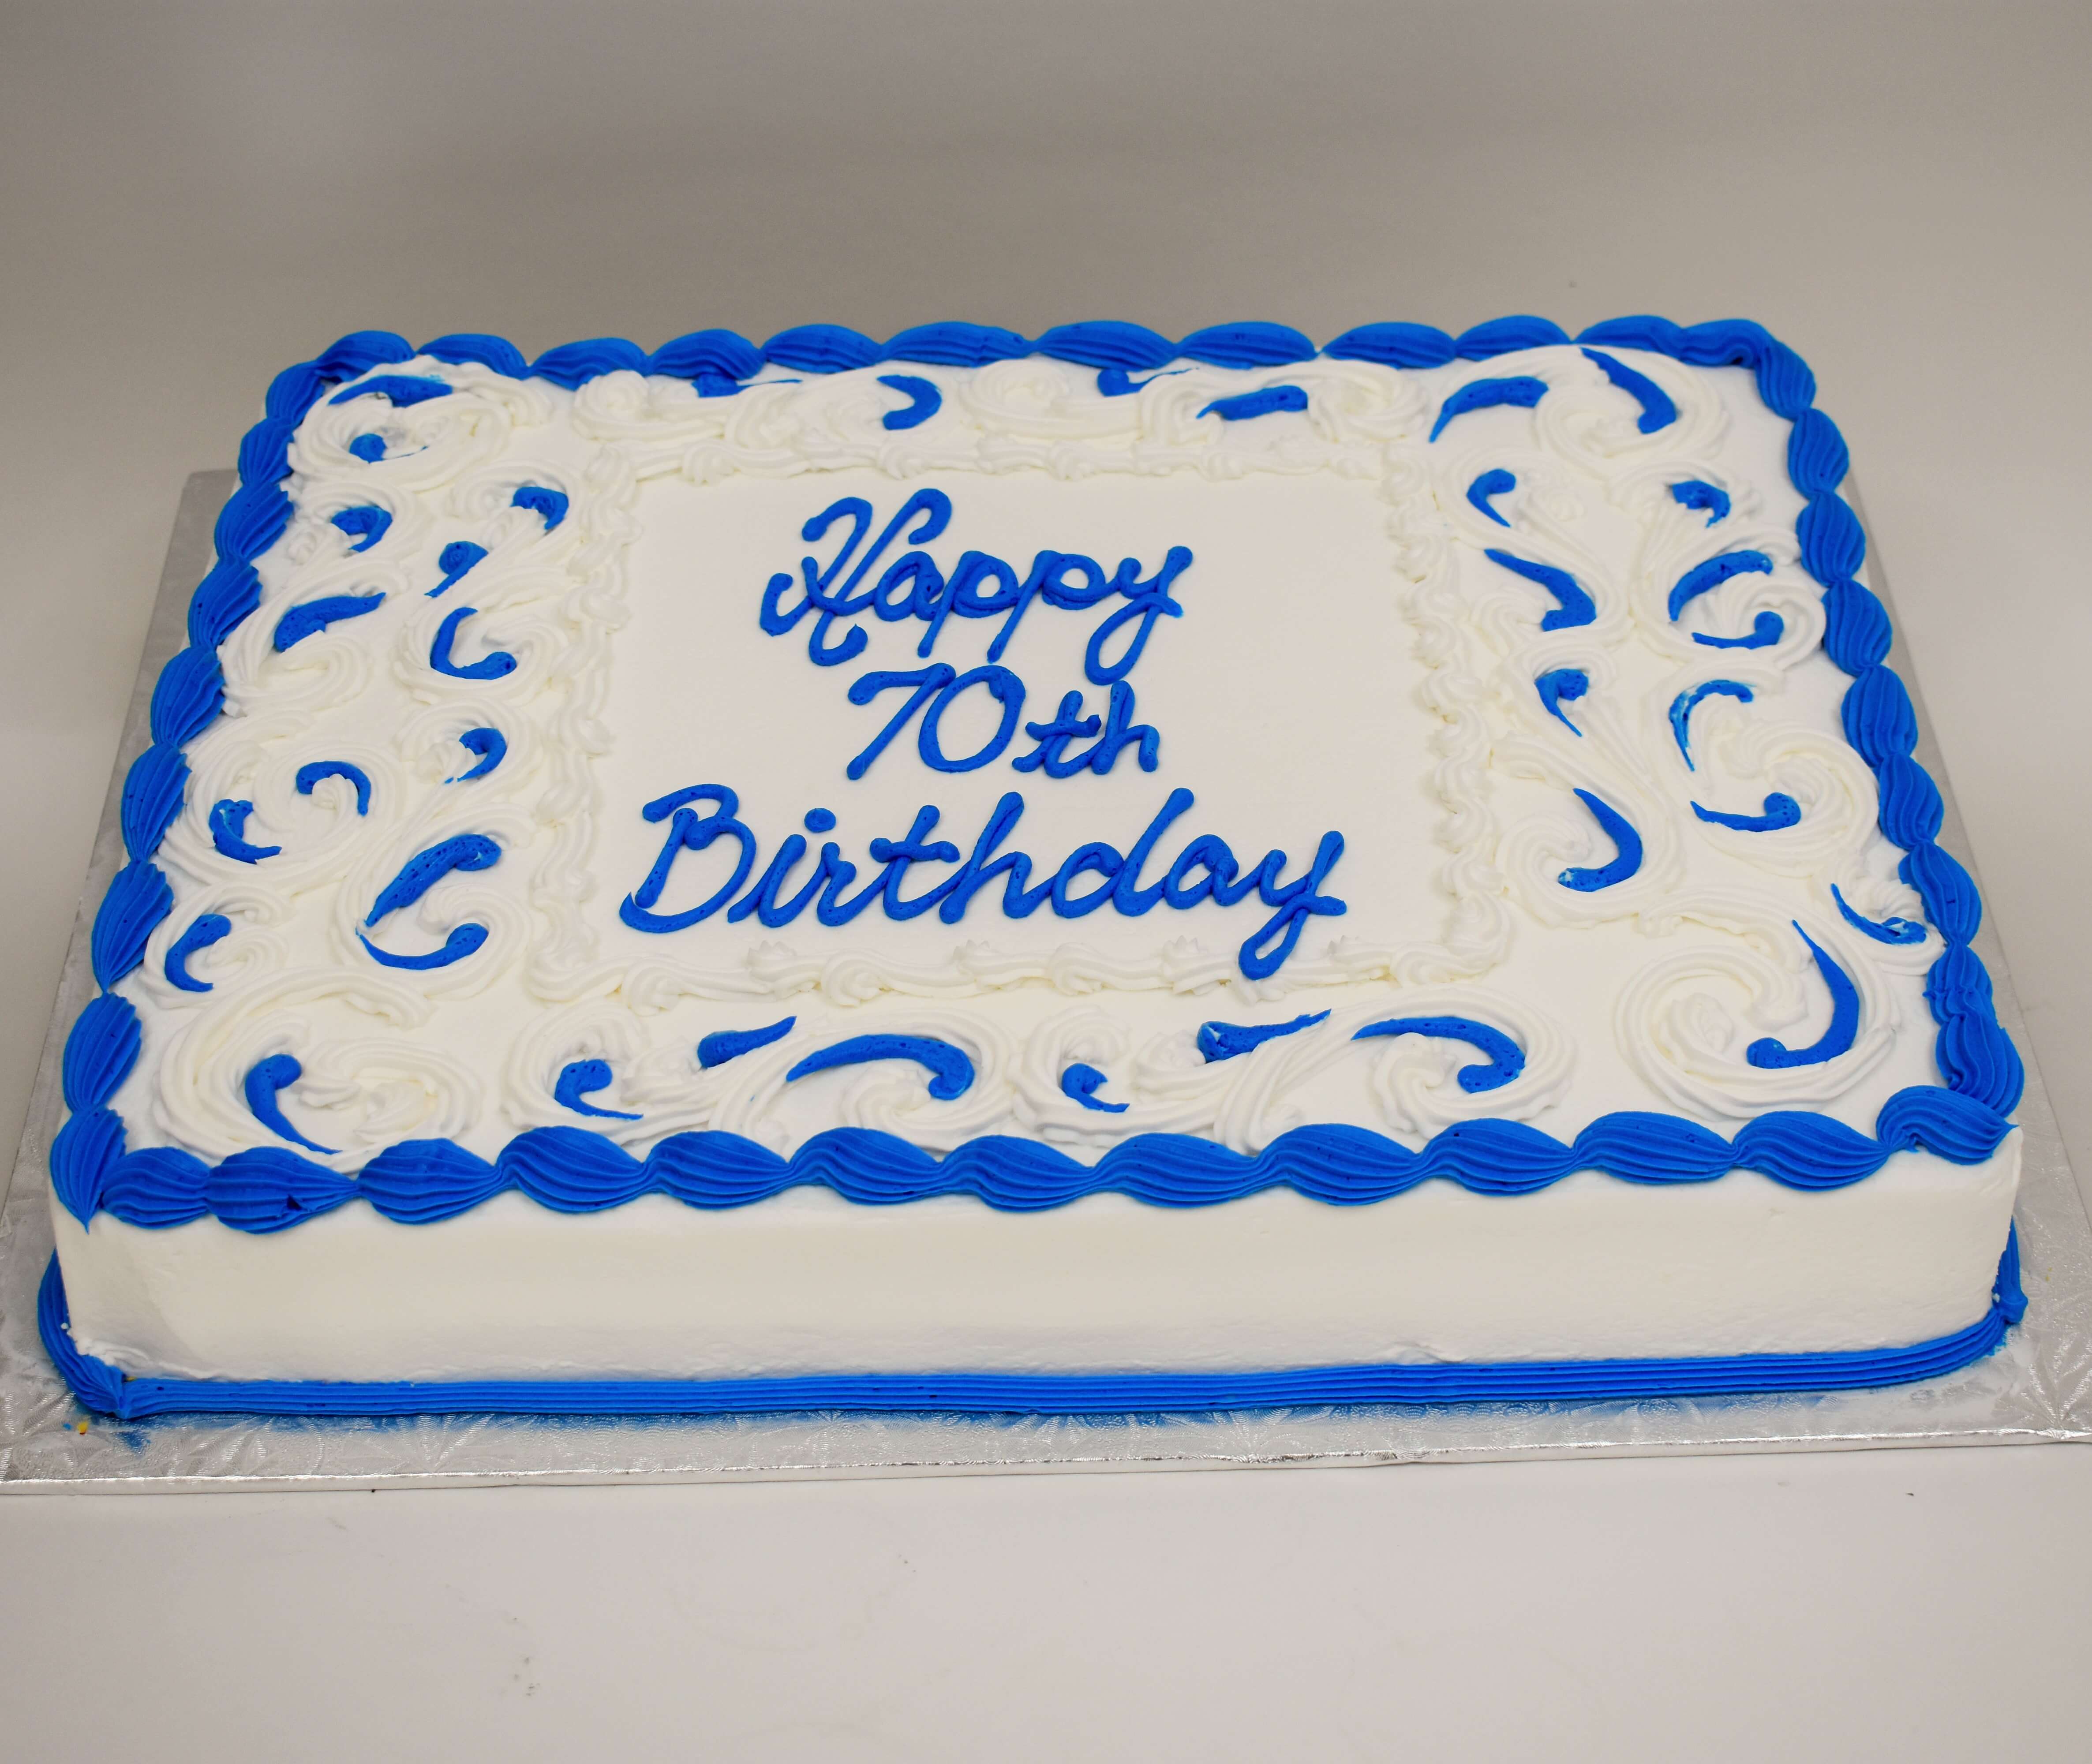 MaArthur's Bakery Custom Cake with Blue and White Icing Scrolling